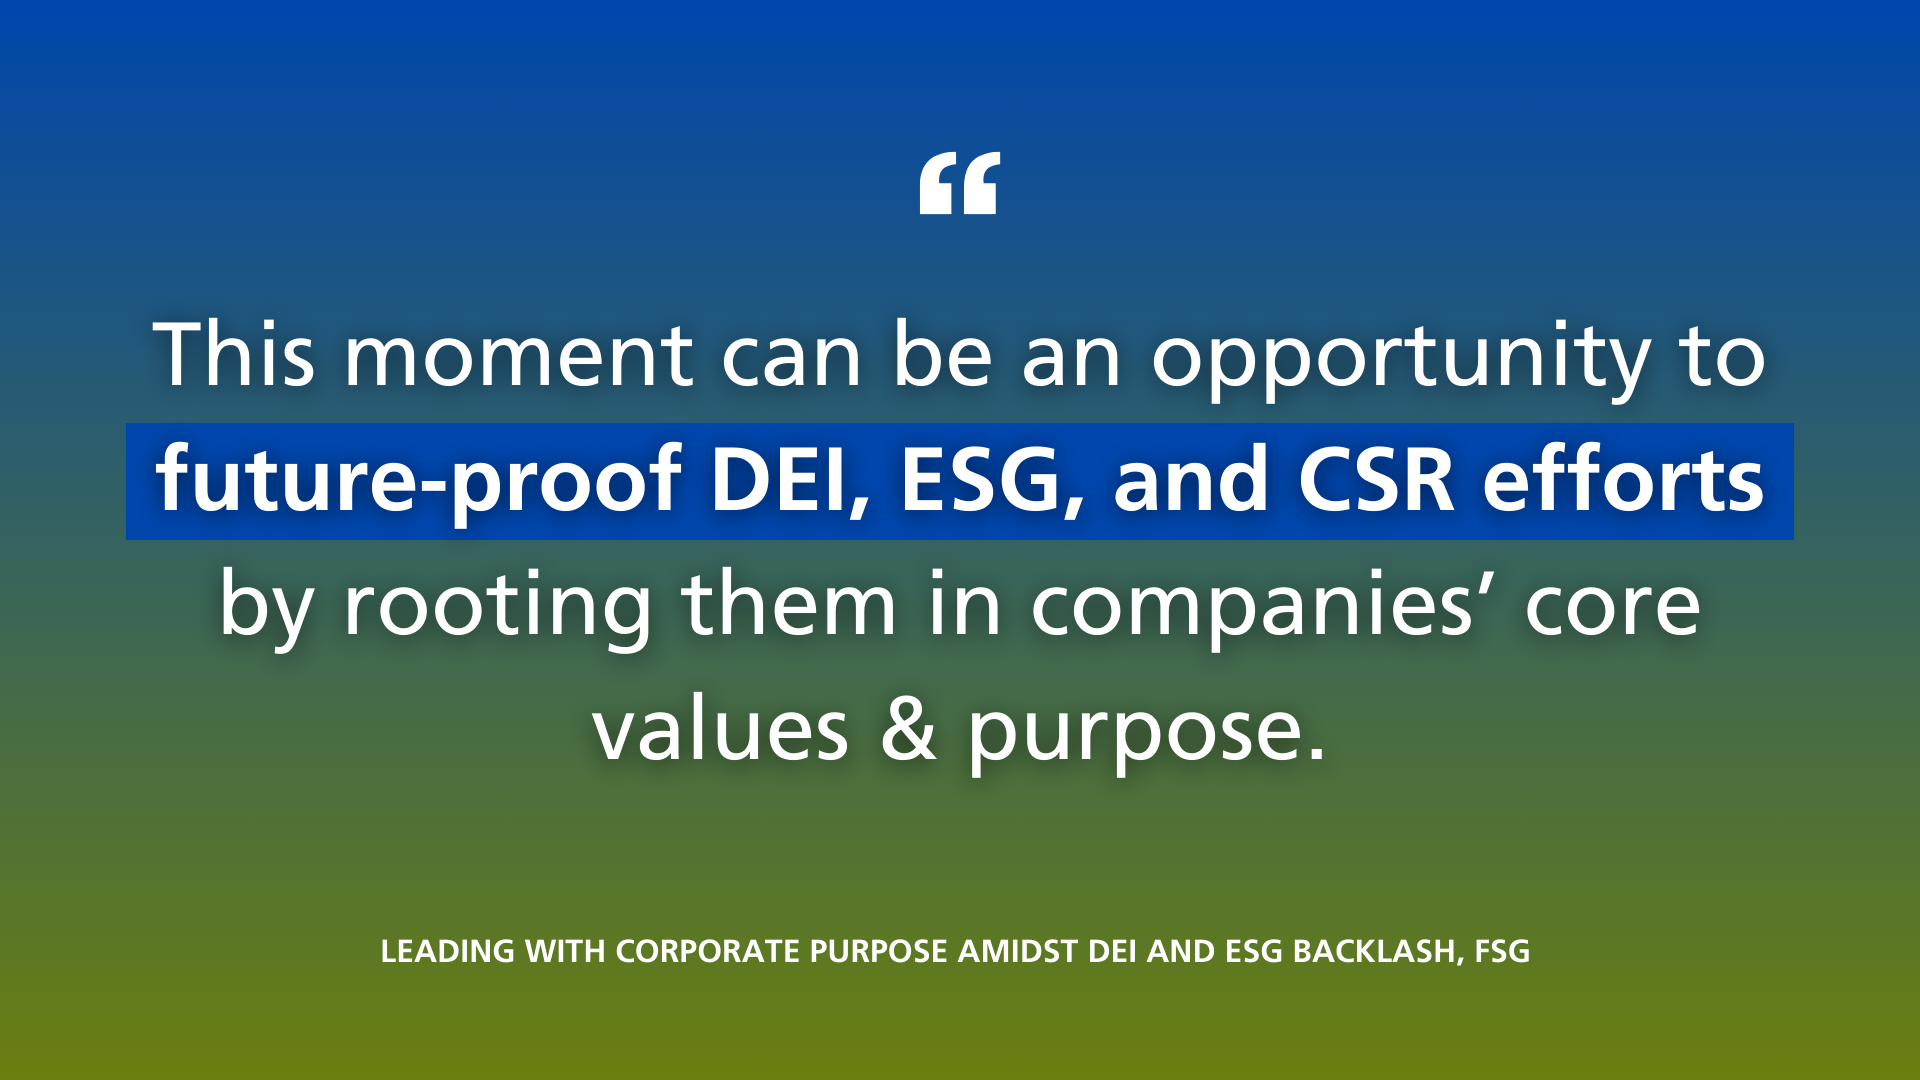 This moment can be an opportunity to future-proof DEI, ESG, and CSR efforts by rooting them in companies' core values and purpose. 